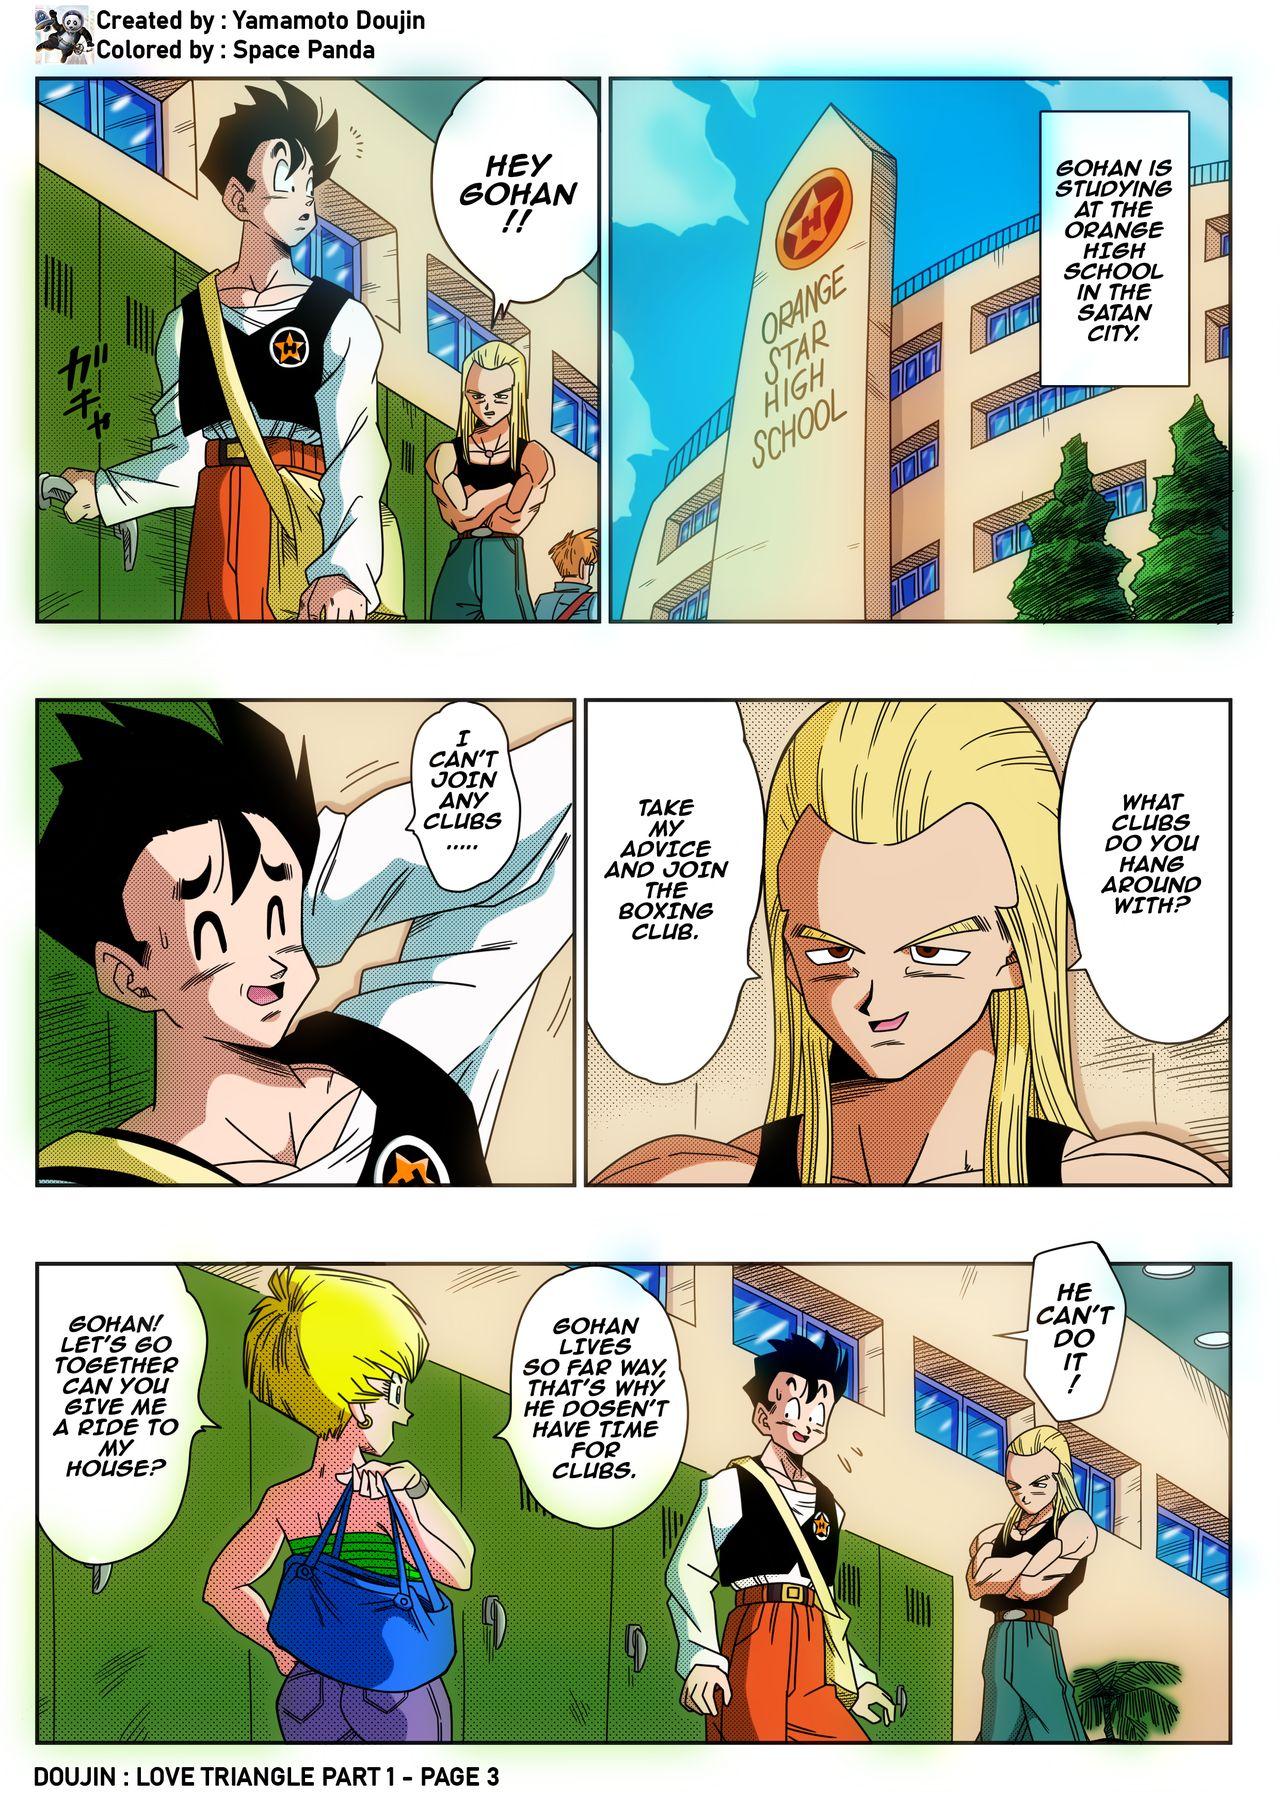 Sexy Sluts Love Triangle - Part 1 - Dragon ball z Amateurs Gone Wild - Page 3